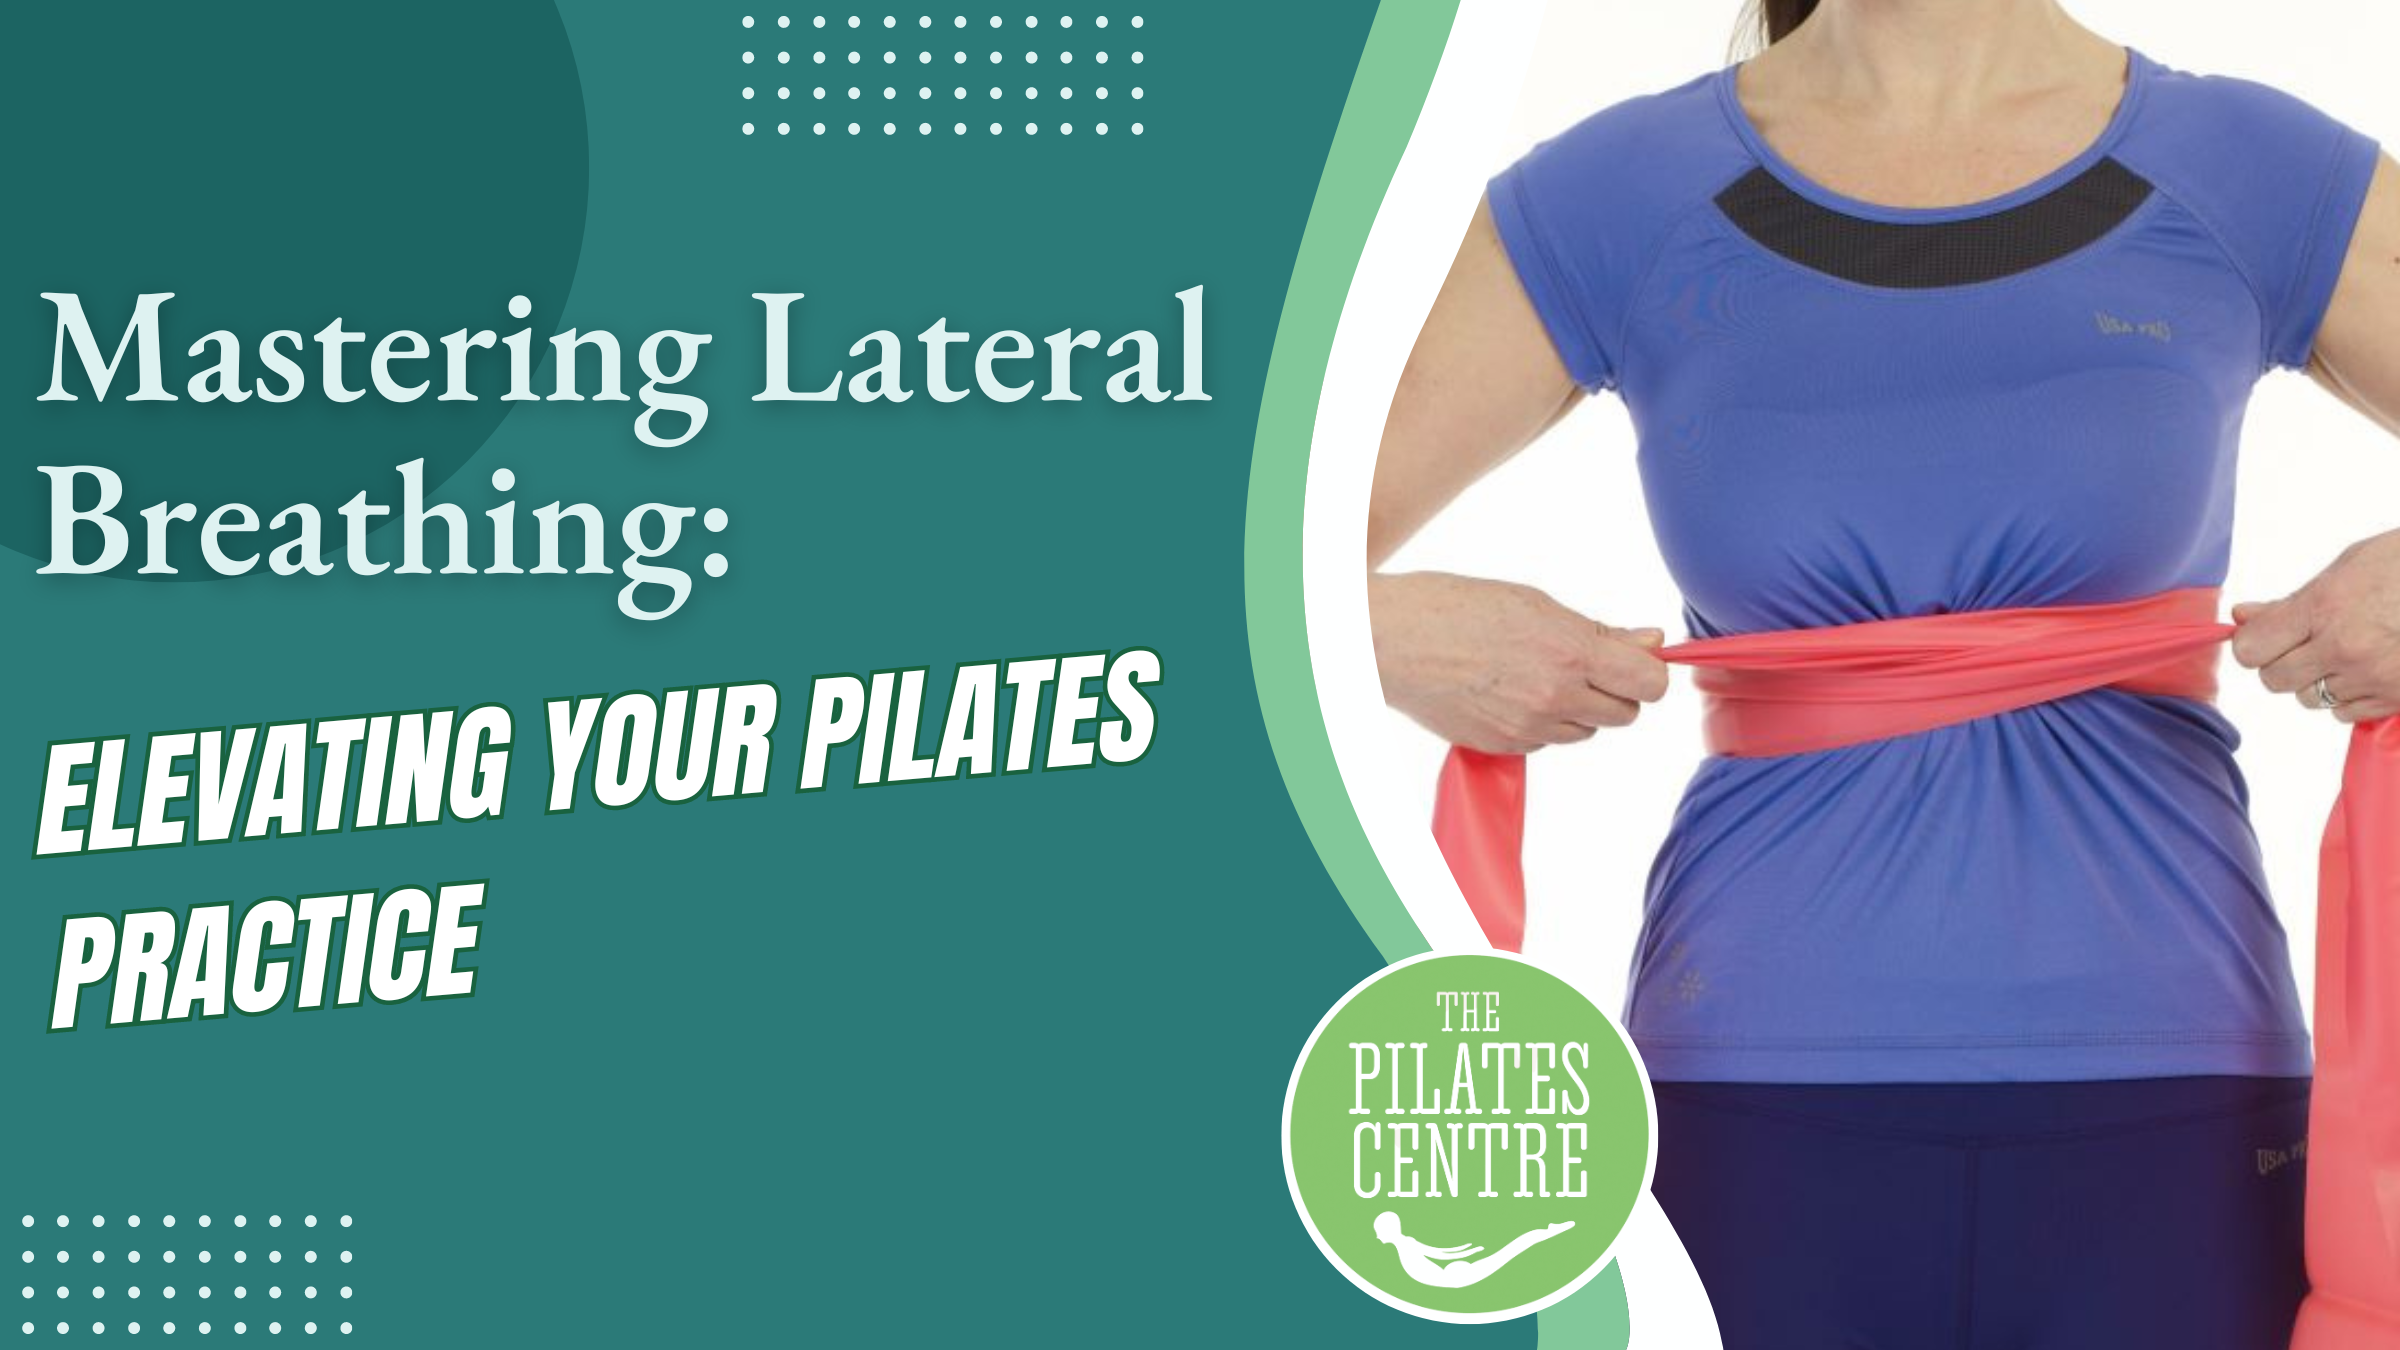 Mastering Lateral Breathing: Elevating Your Pilates Practice